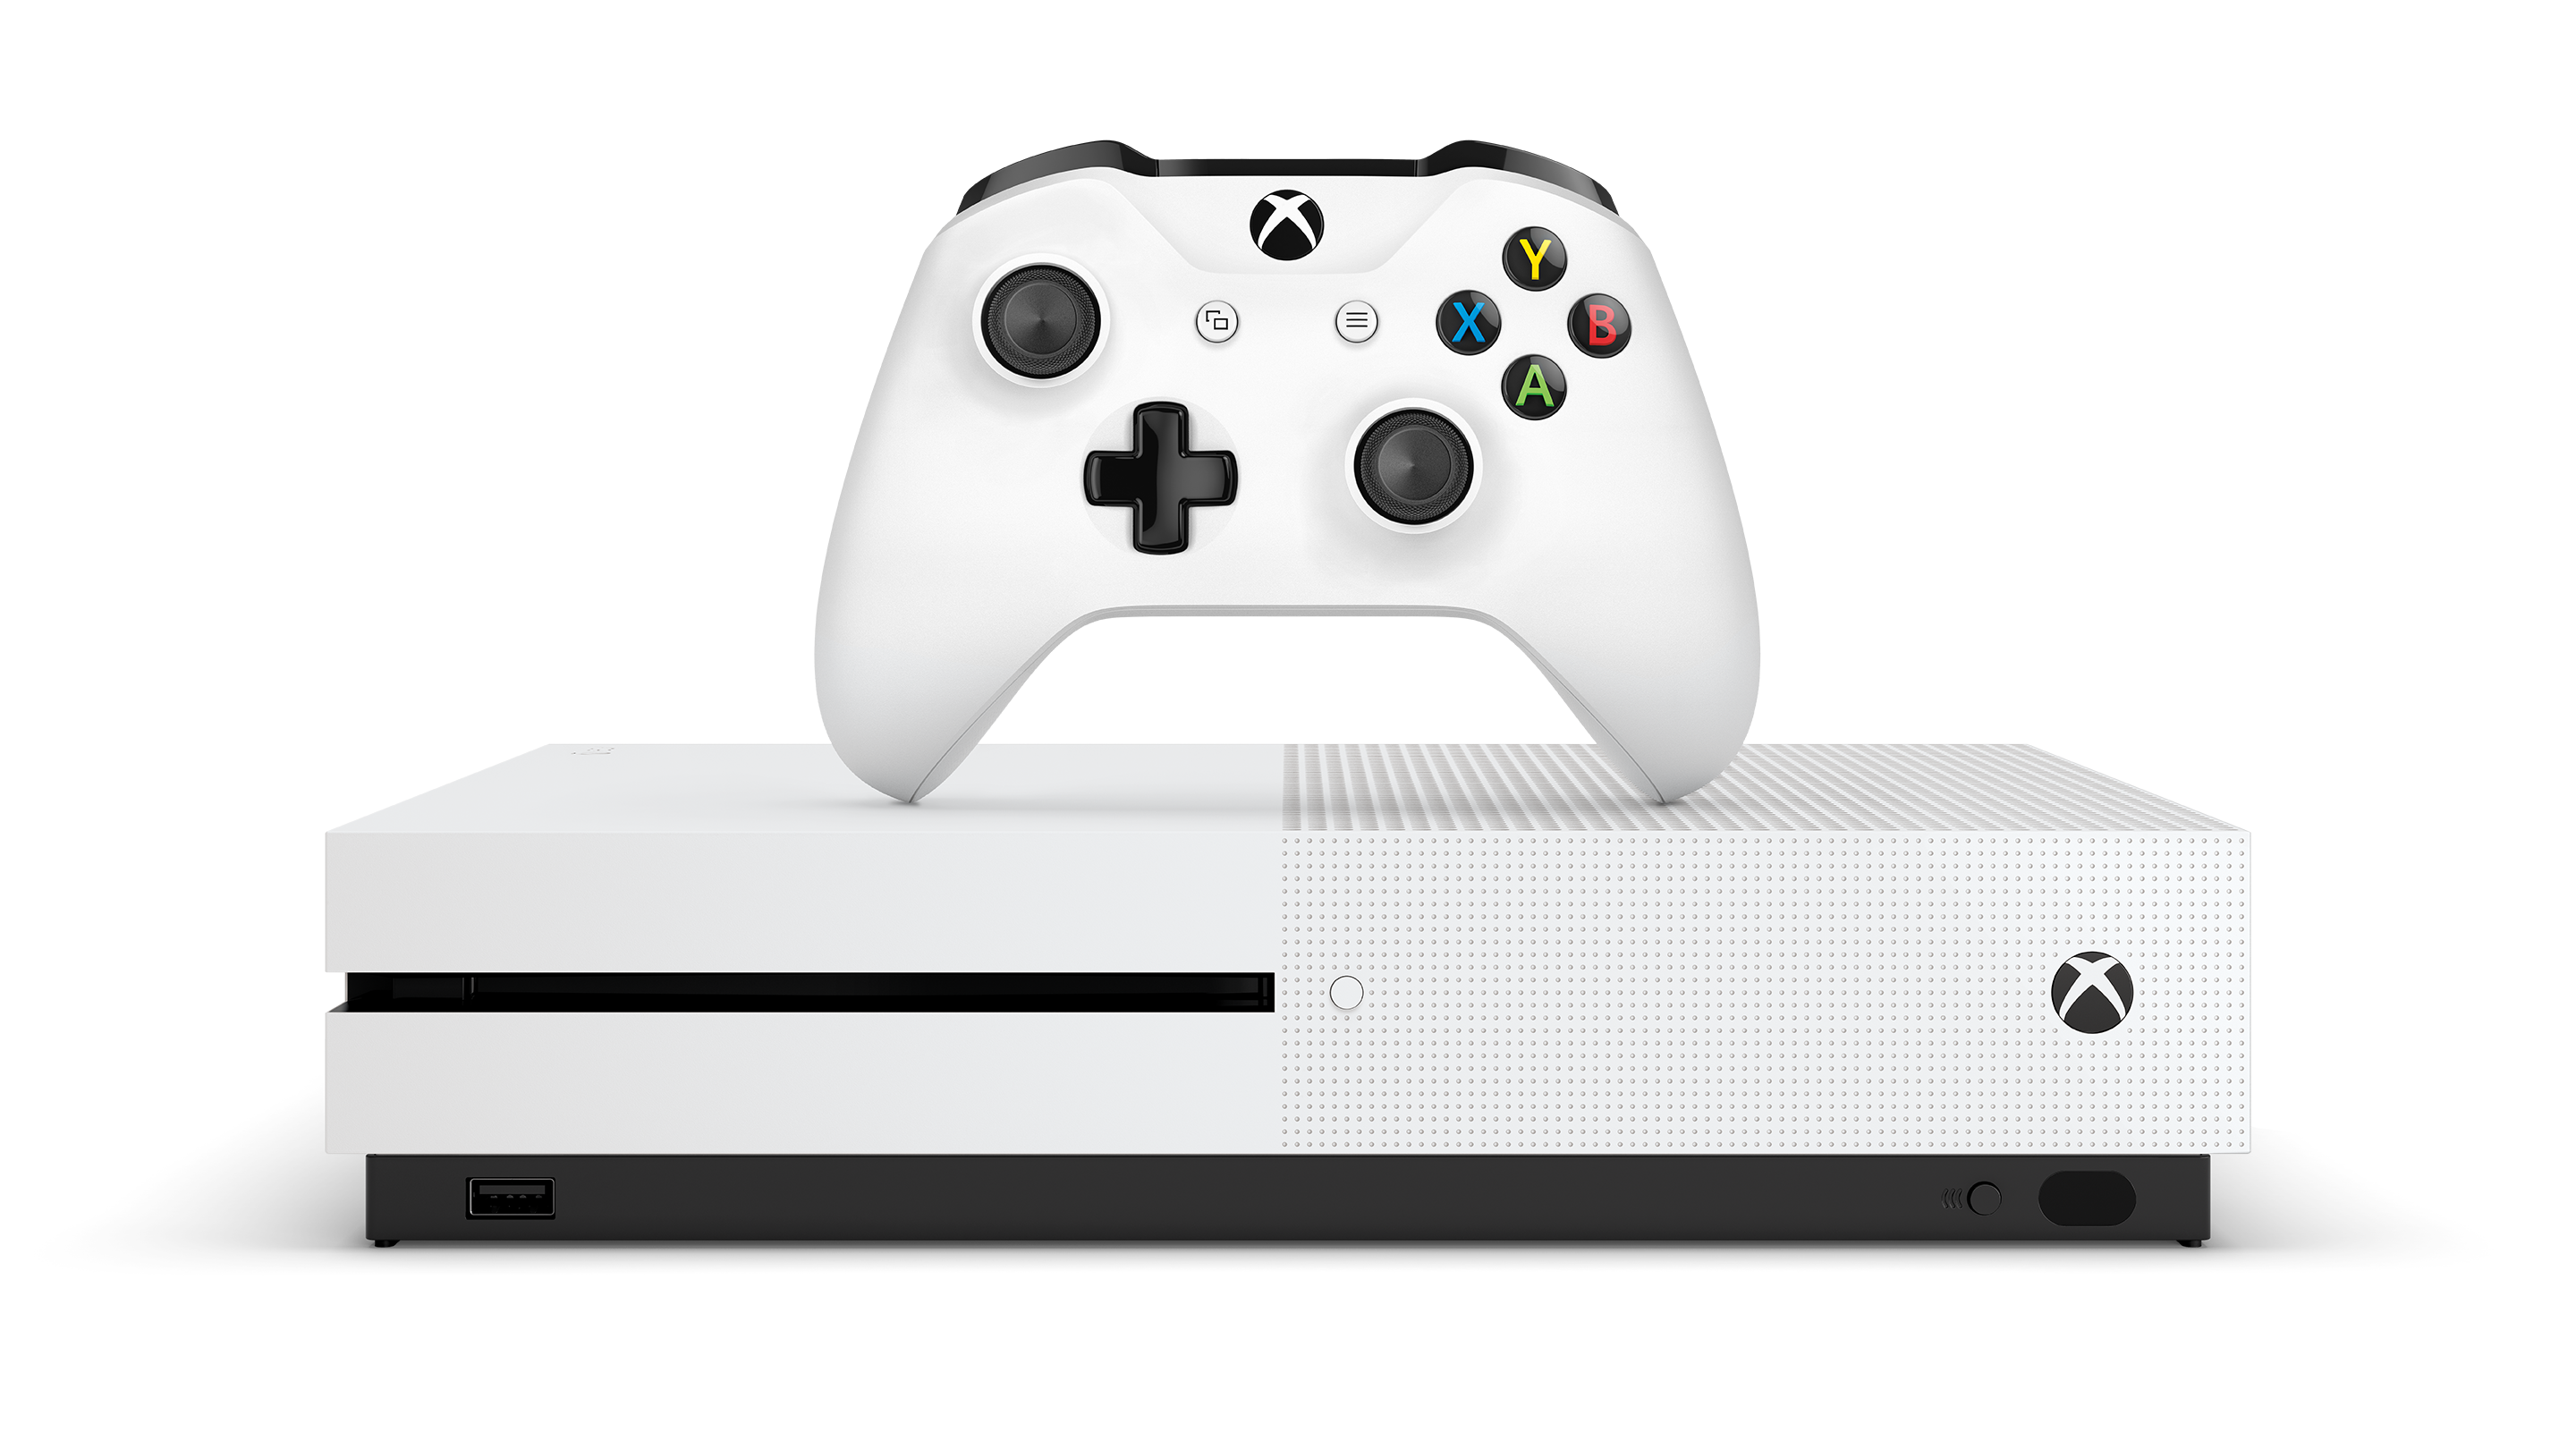 Xbox One S Arrives August 2 - Xbox Wire